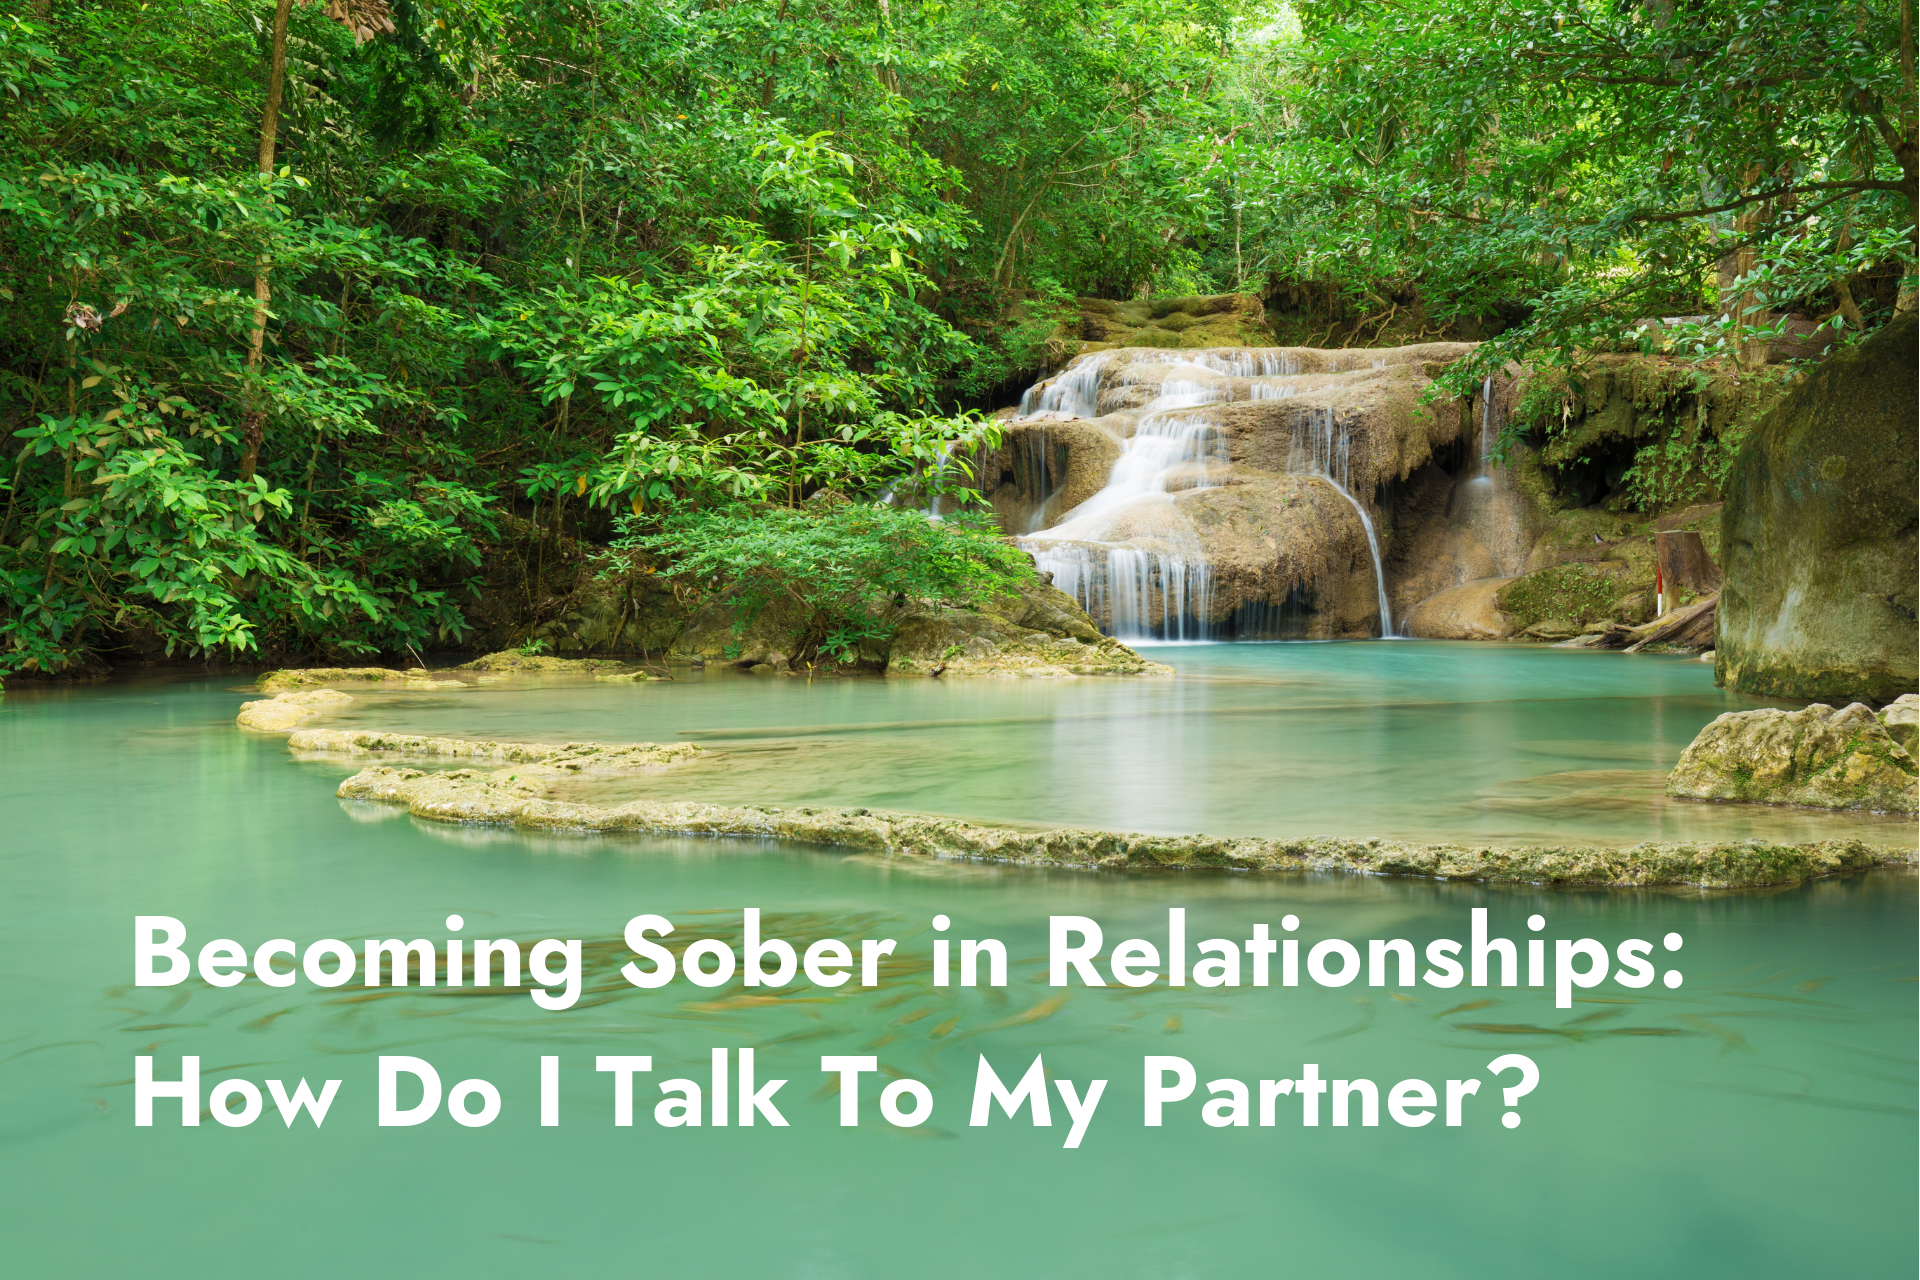 Becoming Sober in Relationships: How Do I Talk To My Partner?